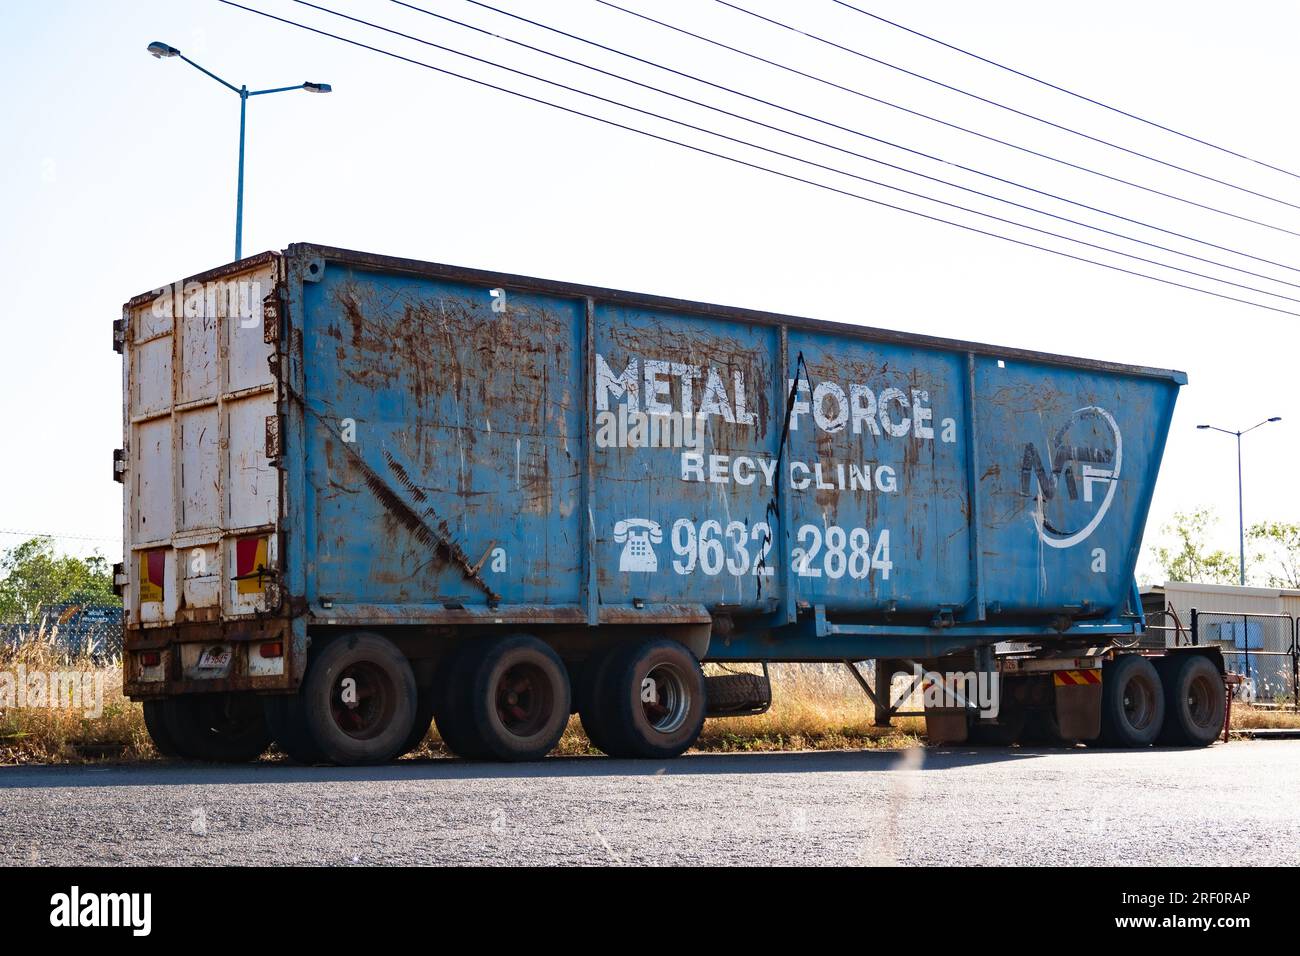 A blue and well worn large metals recycling bin awaits a new load of scrap atop an 18 wheeler truck trailer. Stock Photo